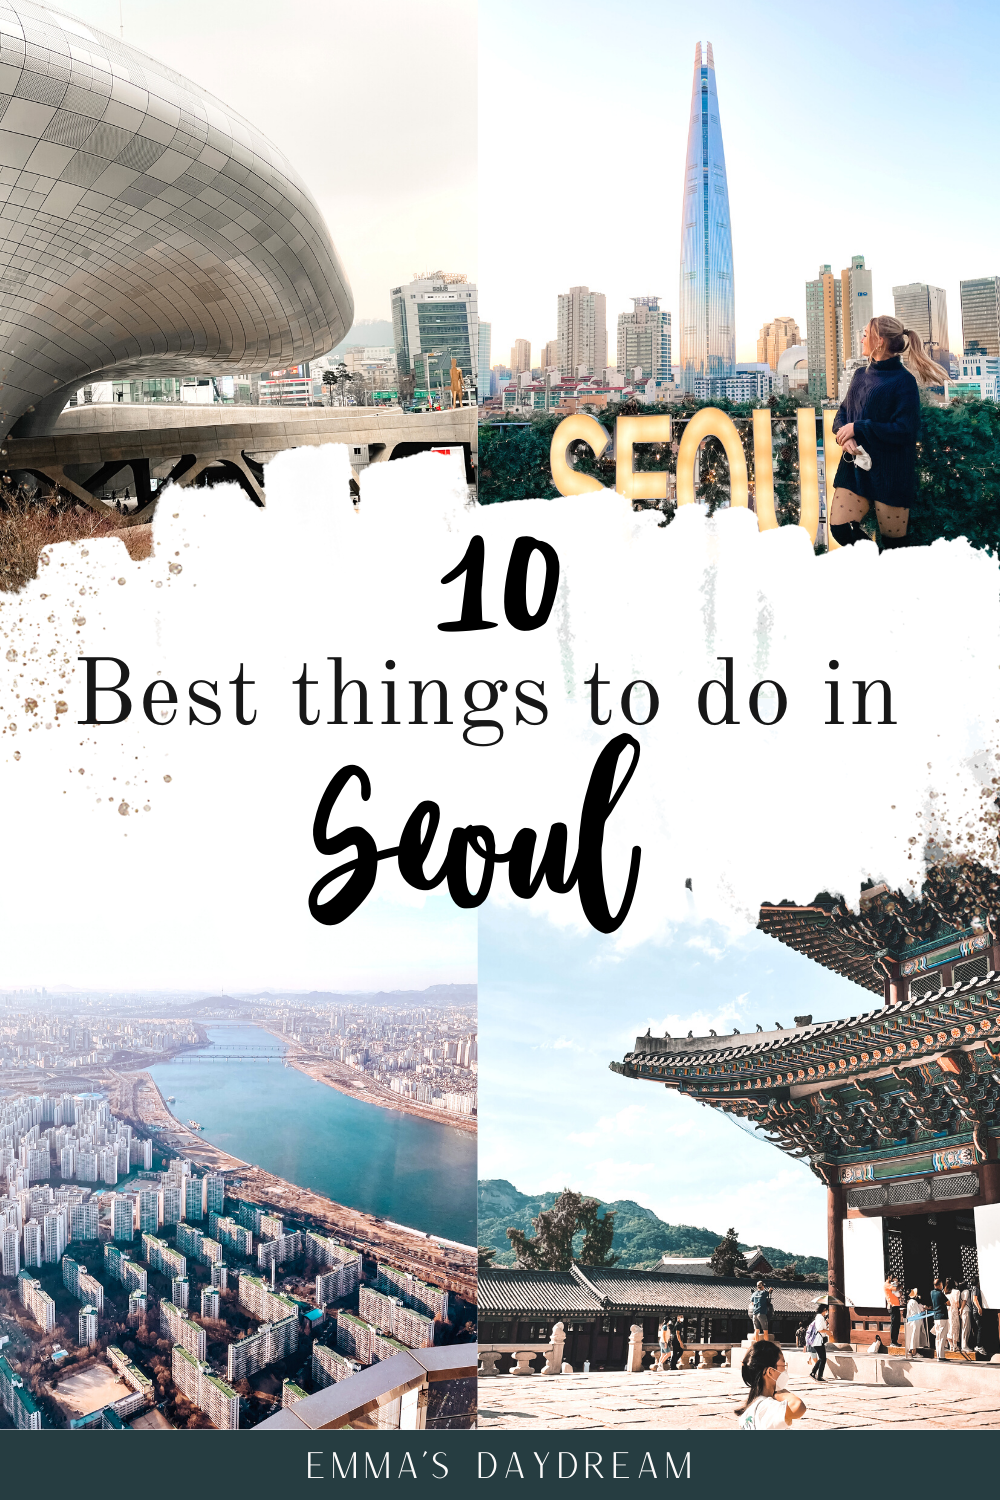 Best Things to Do In Seoul